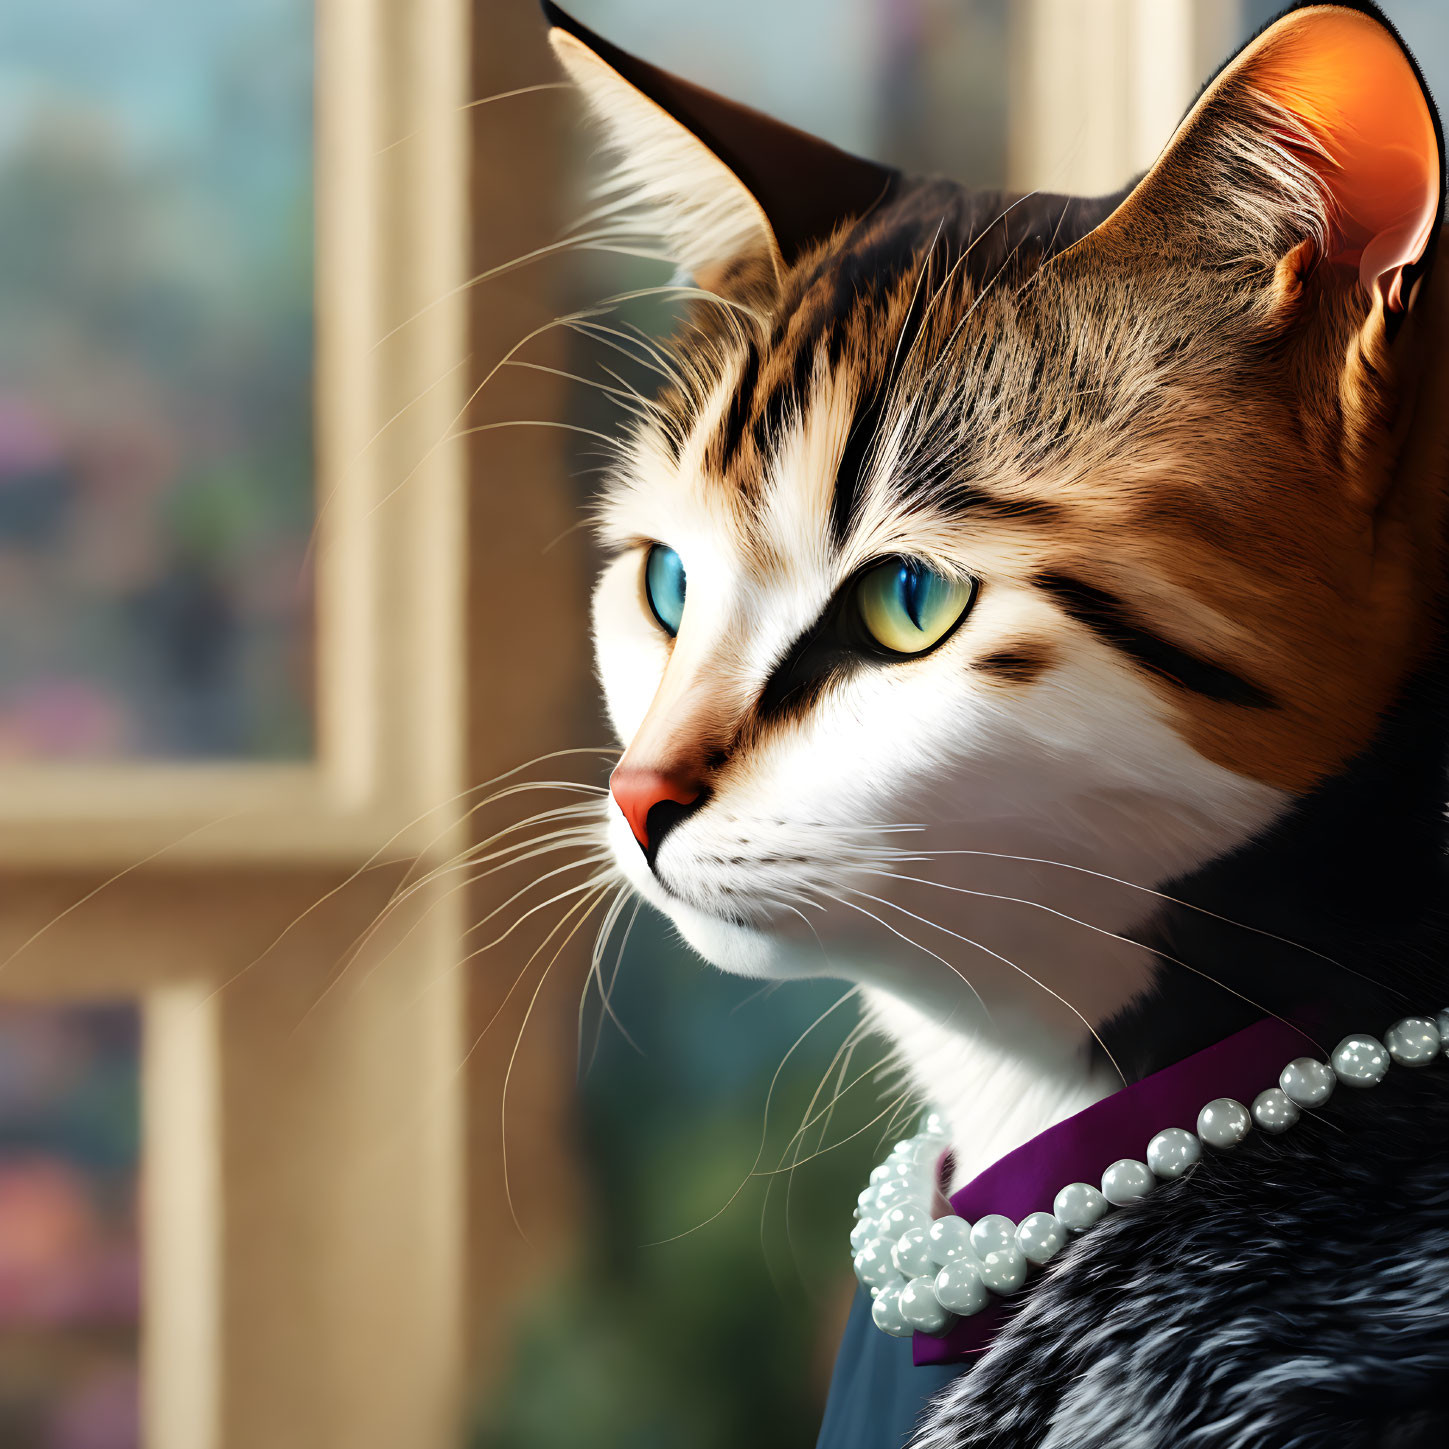 Domestic Cat with Green Eyes and Pearl Necklace Looking out Window